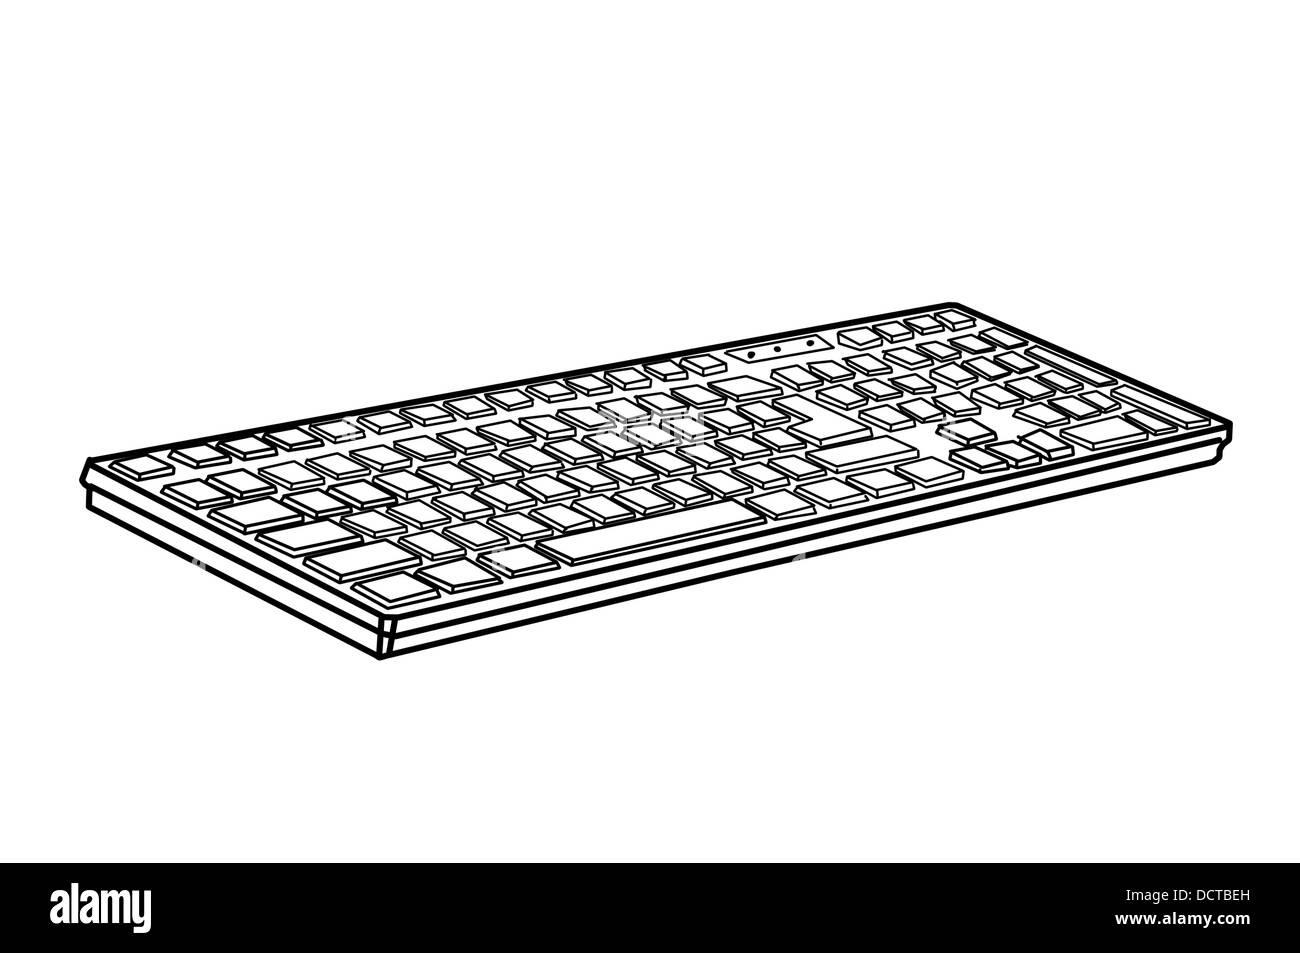 Keyboard drawing Cut Out Stock Images & Pictures - Alamy